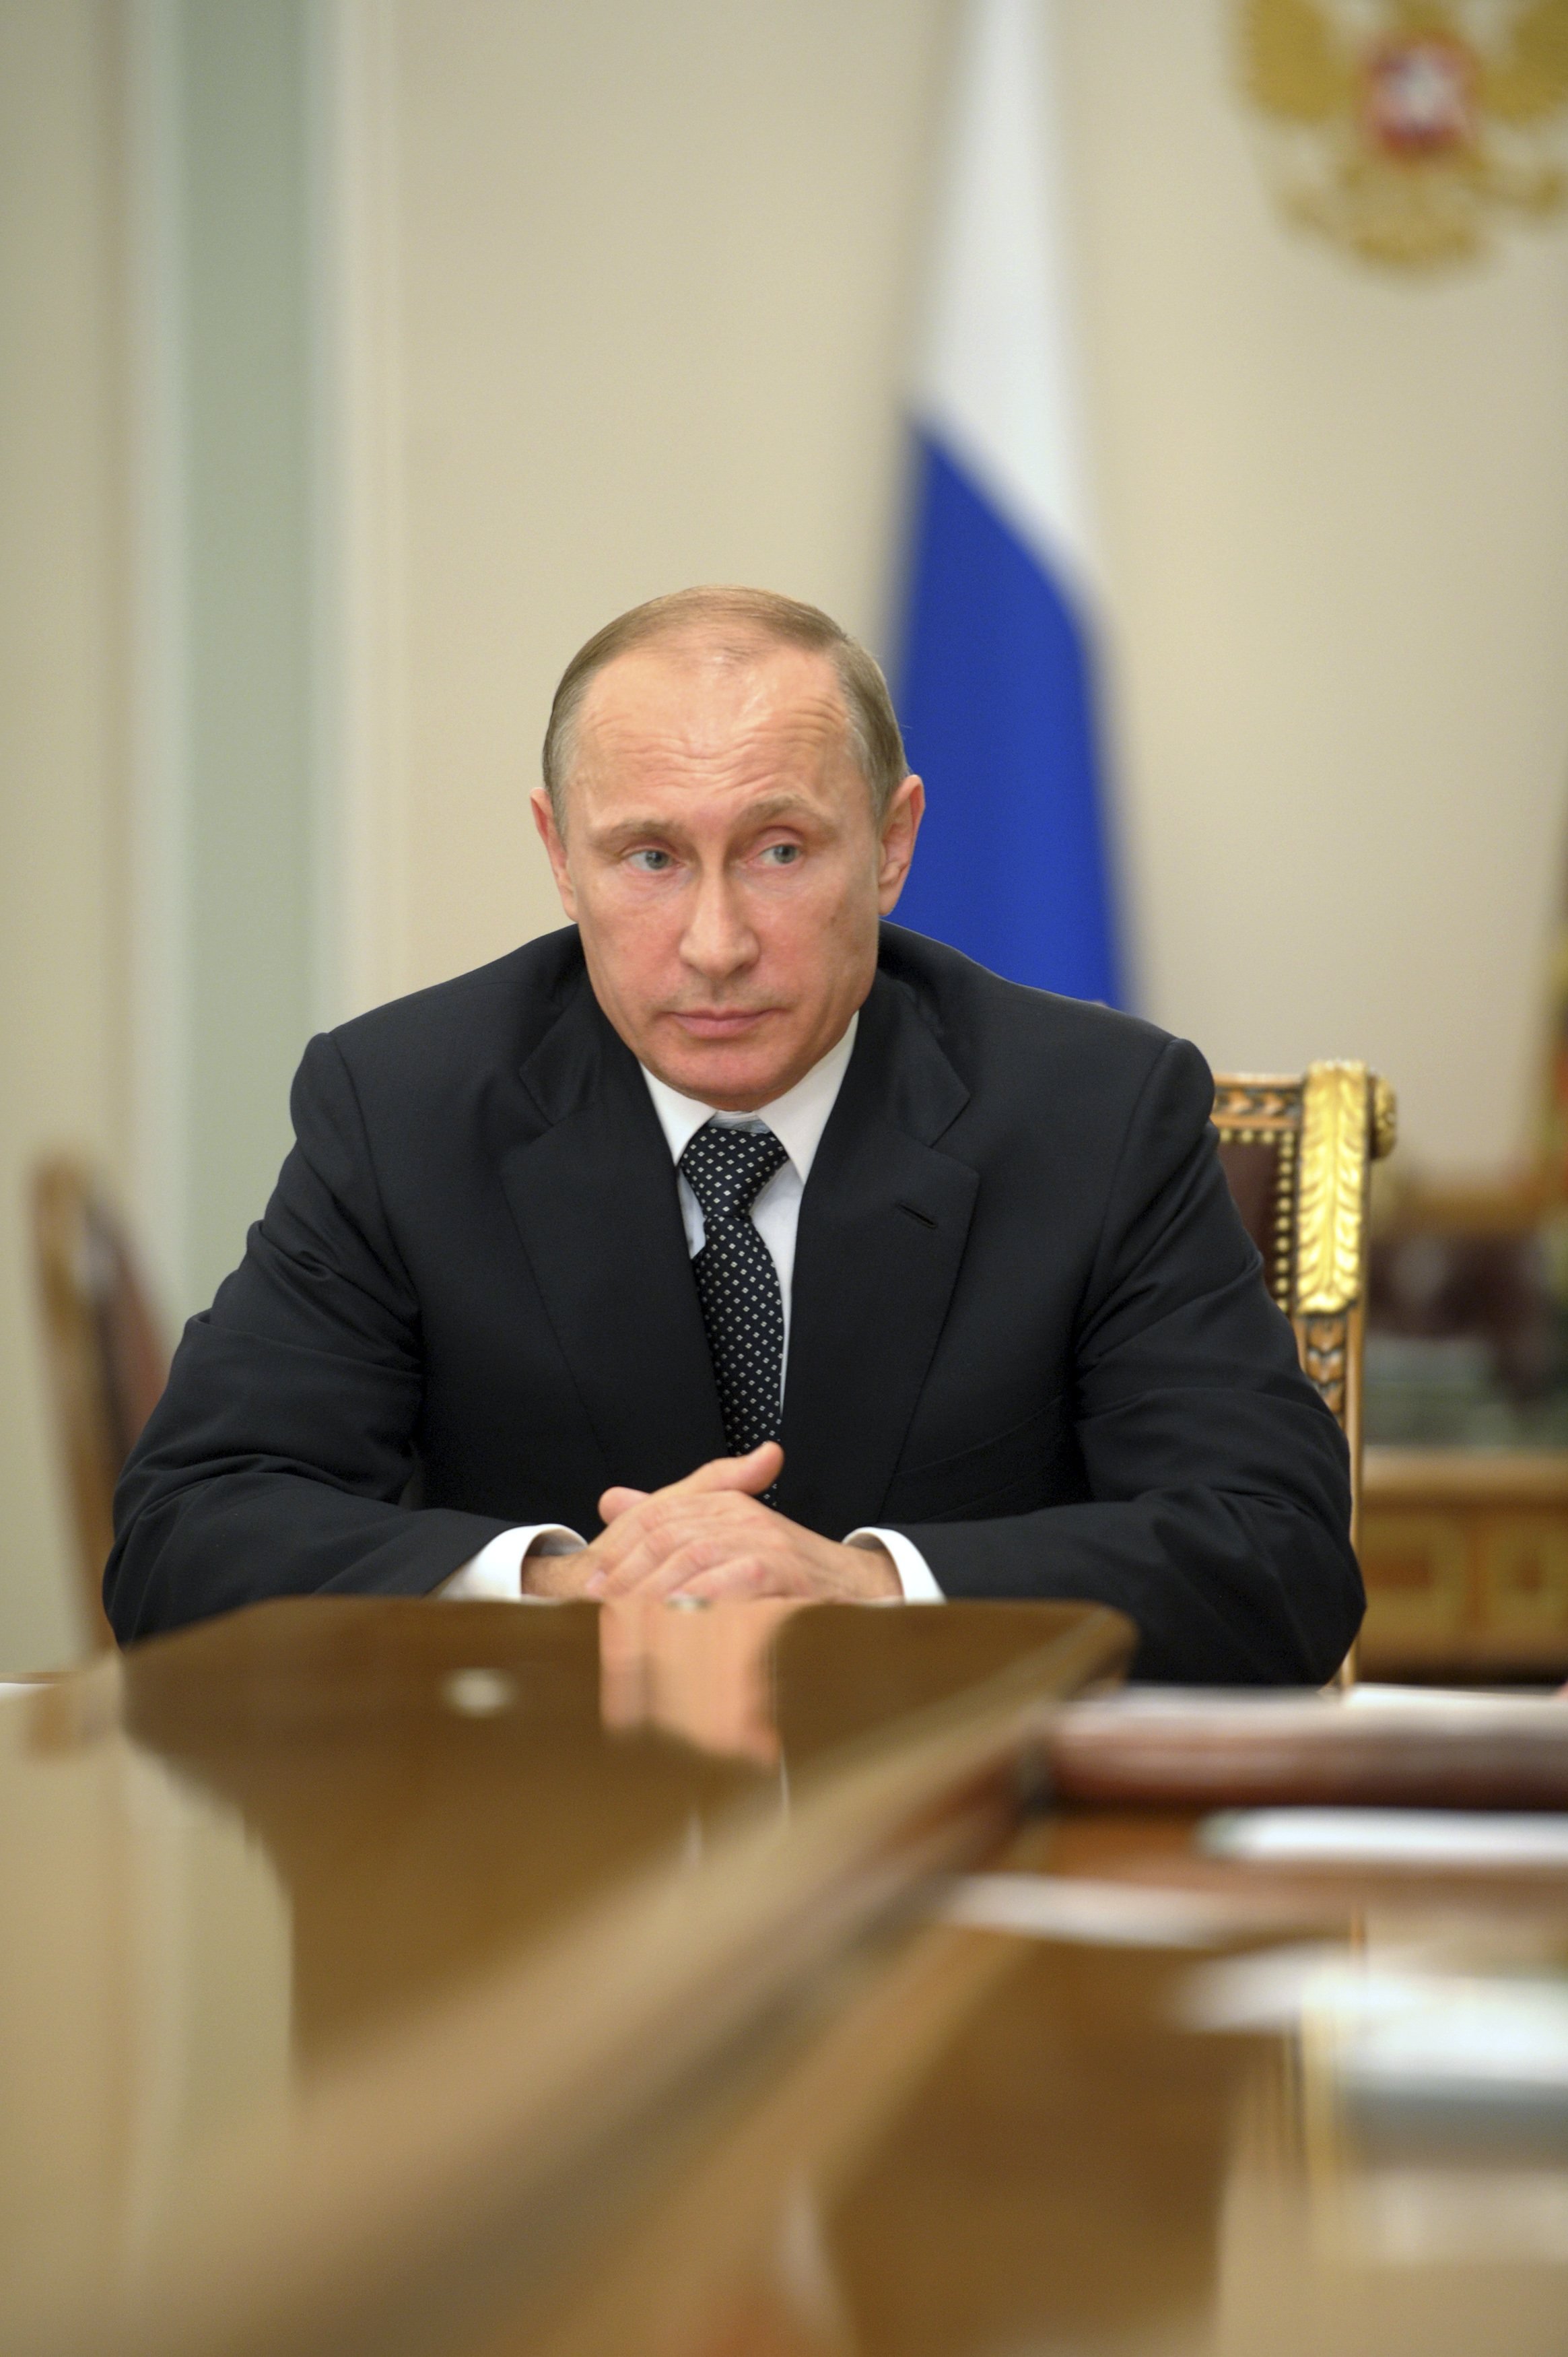 Russia's President Vladimir Putin chairs a meeting at the Novo-Ogaryovo state residence outside Moscow on July 17, 2014.